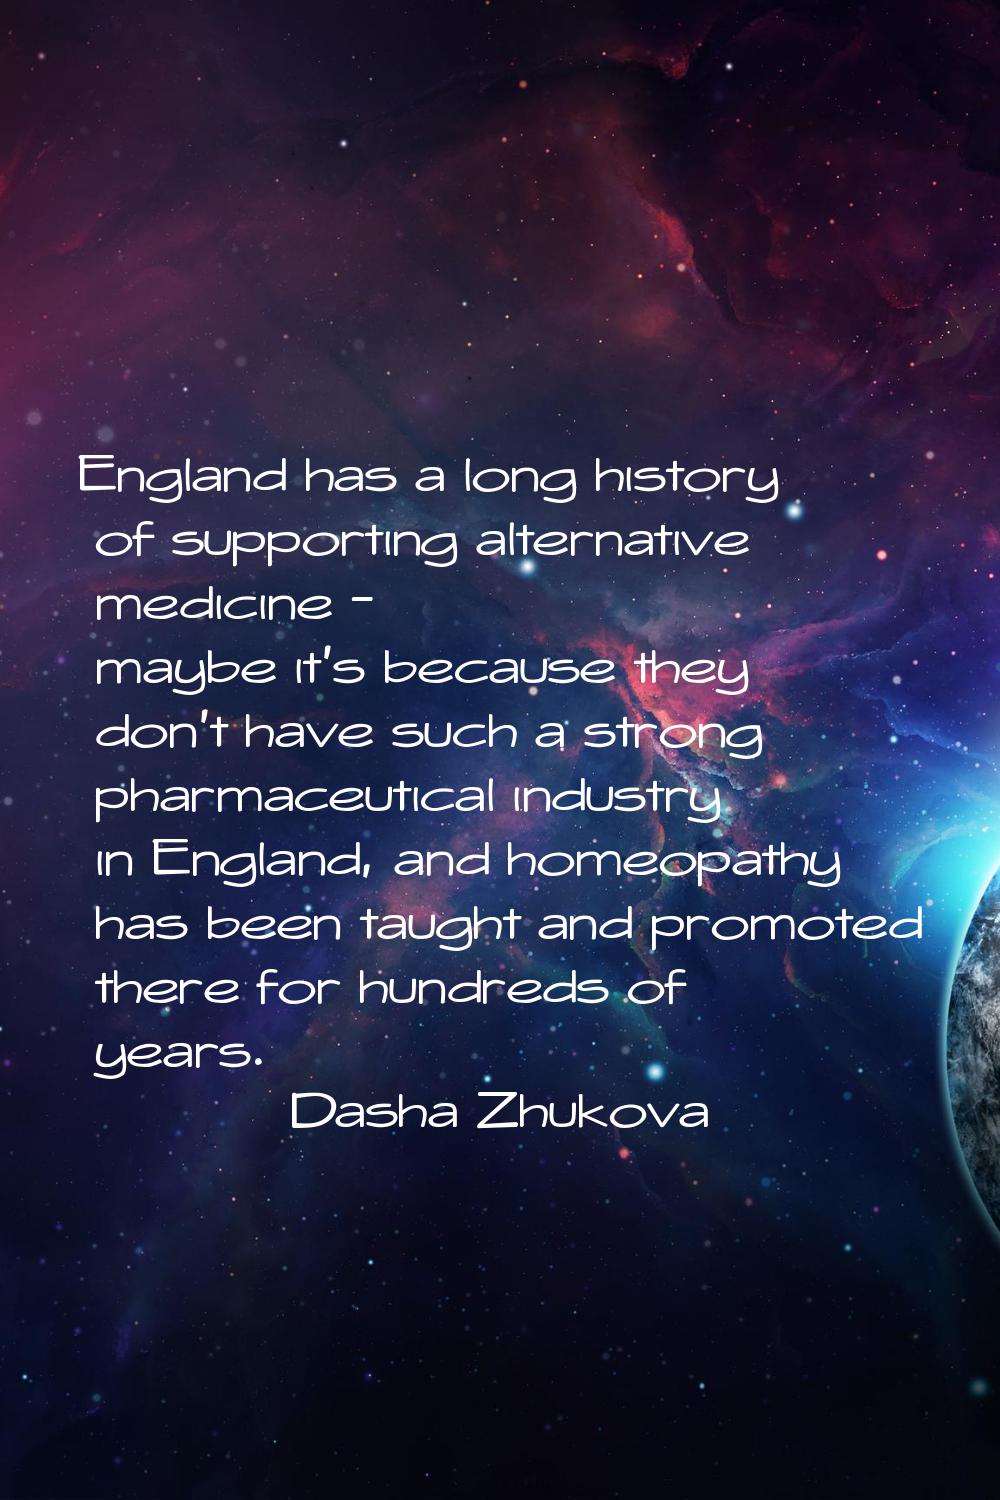 England has a long history of supporting alternative medicine - maybe it's because they don't have 